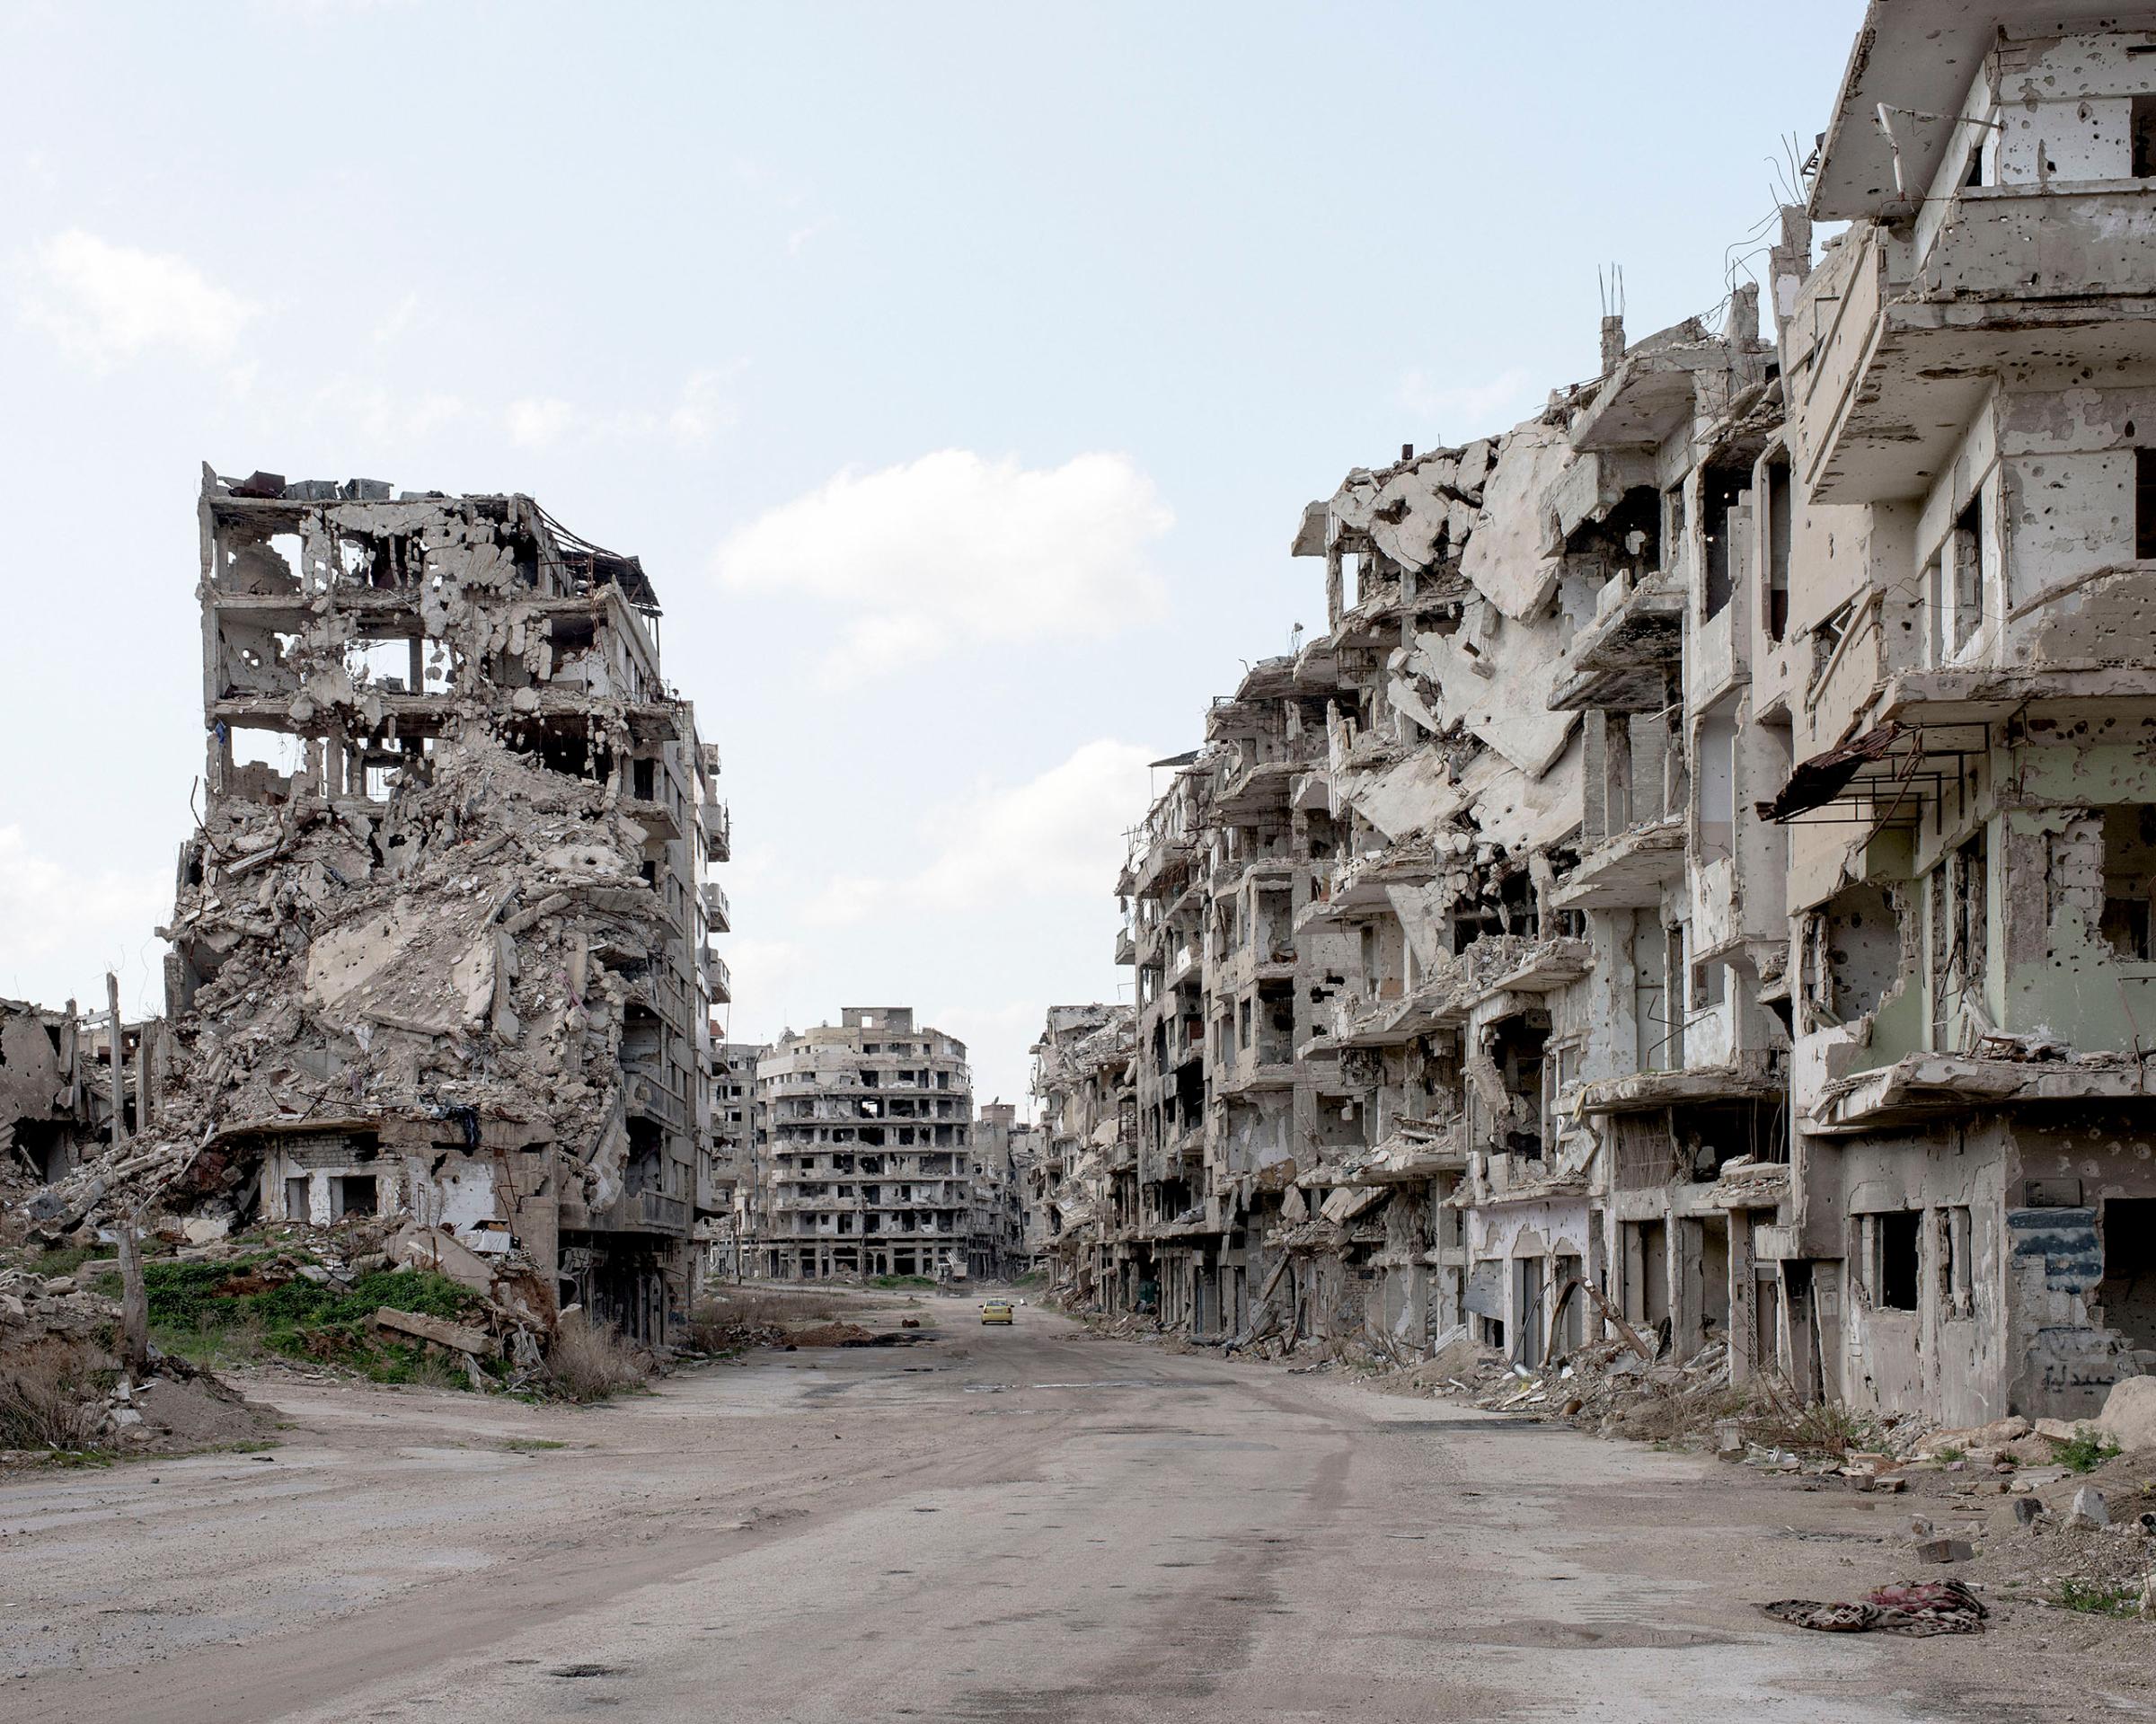 A view of the destruction in Homs, Syria, March 2016.